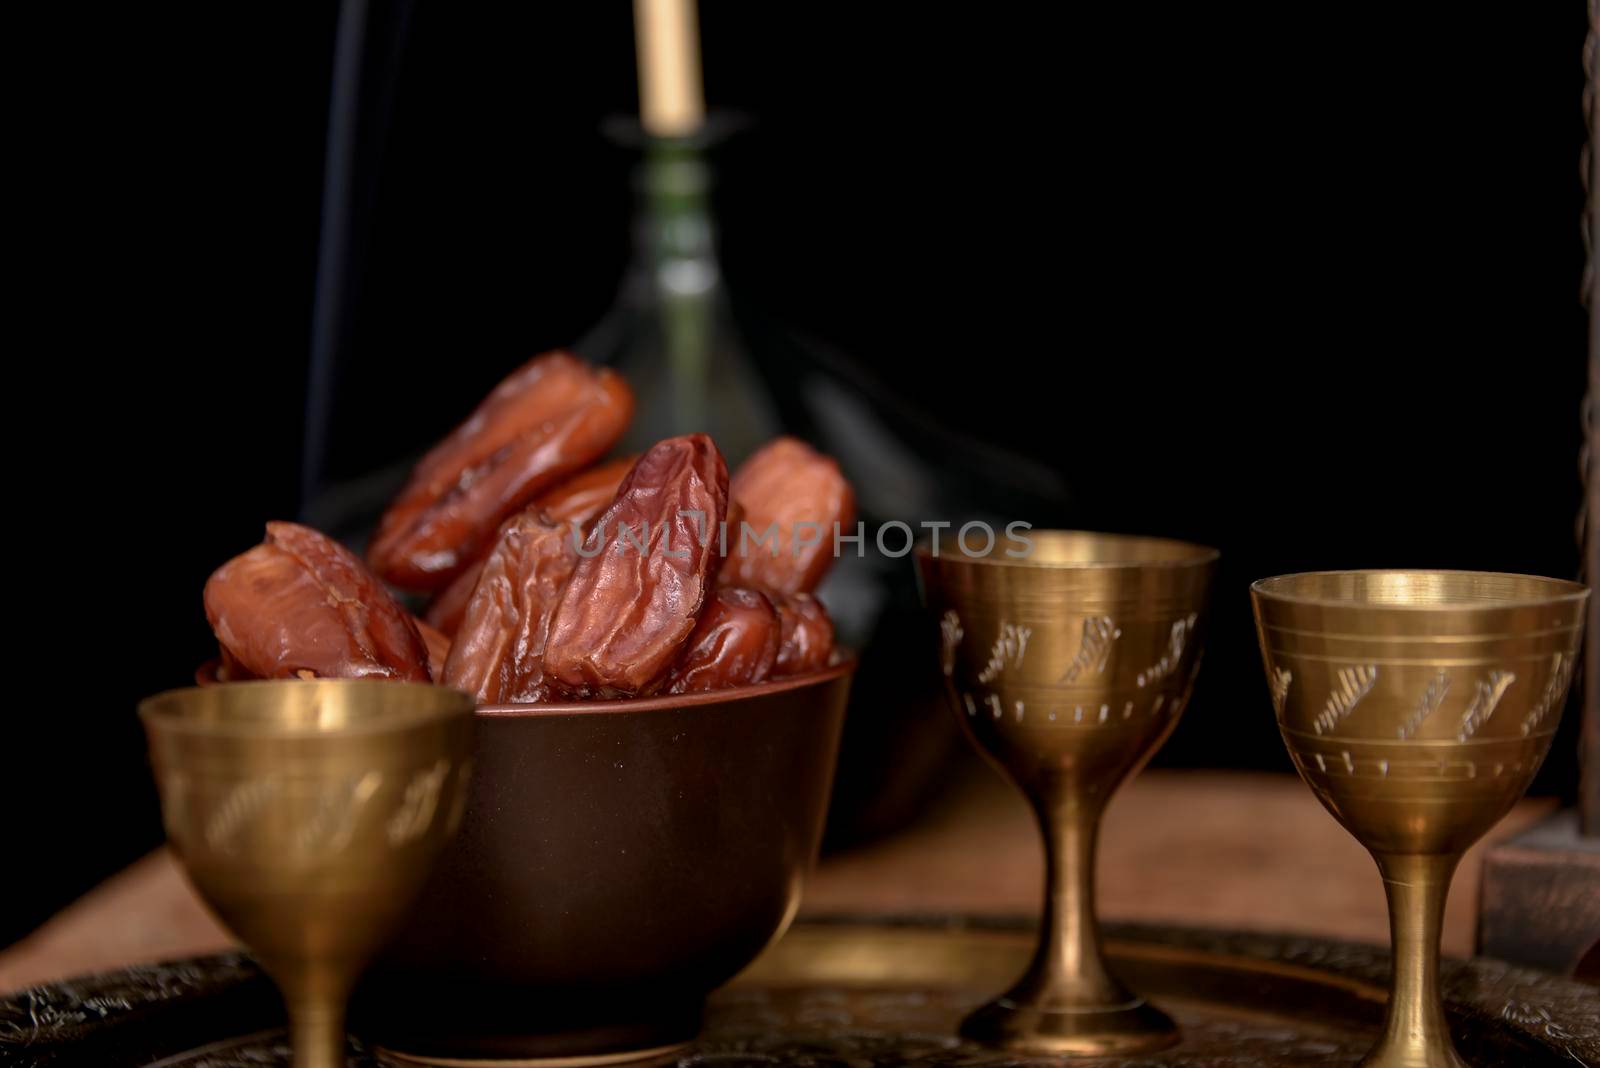 Ramadan concept. Dates closeup in the foreground. Ramadan Lantern on a wooden table. Textured black wall background